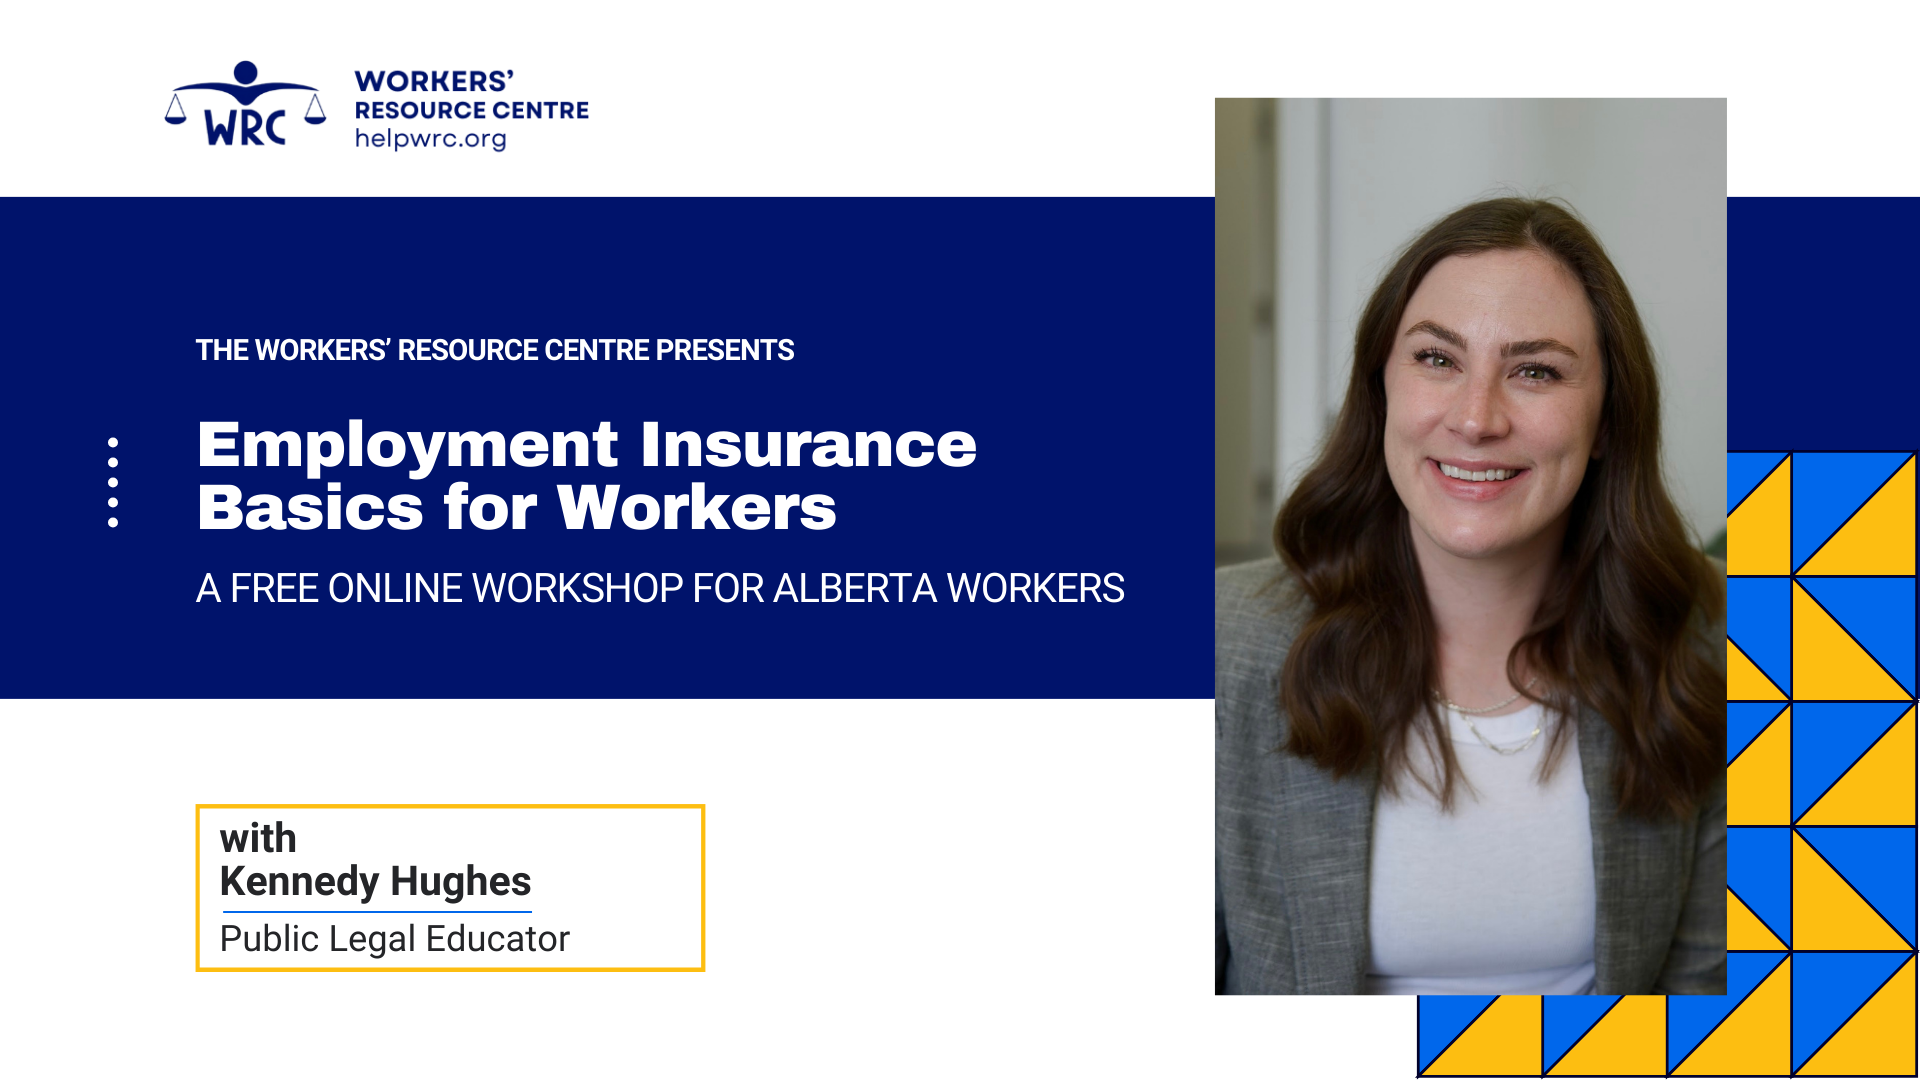 Employment Insurance Basics for Workers. A Free online workshop for Alberta workers with Kennedy Hughes, Public Legal Educator